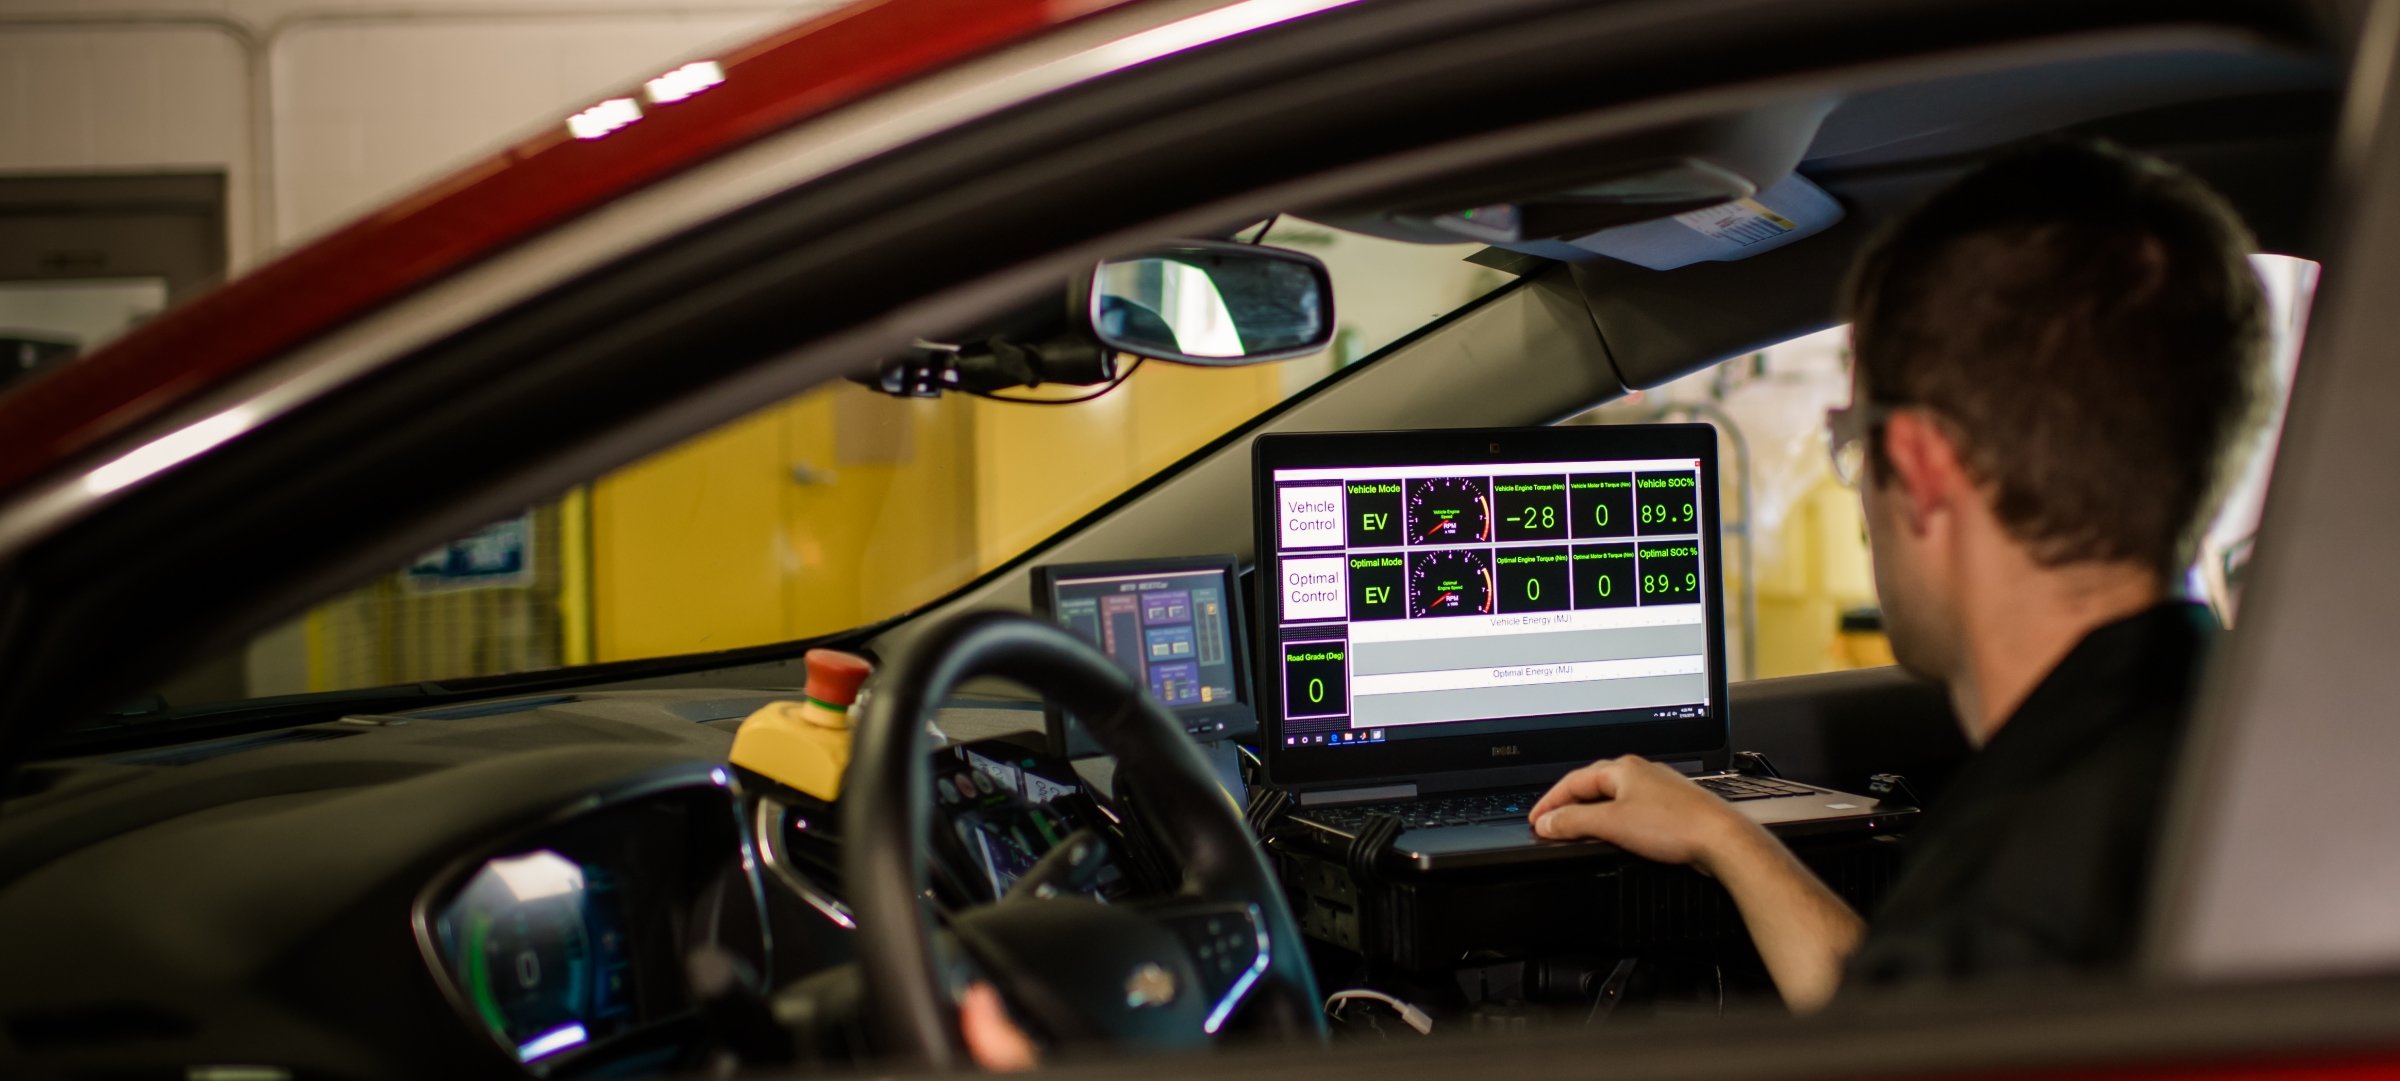 A man in the drivers seat of a car holds a laptop with a map on the screen.